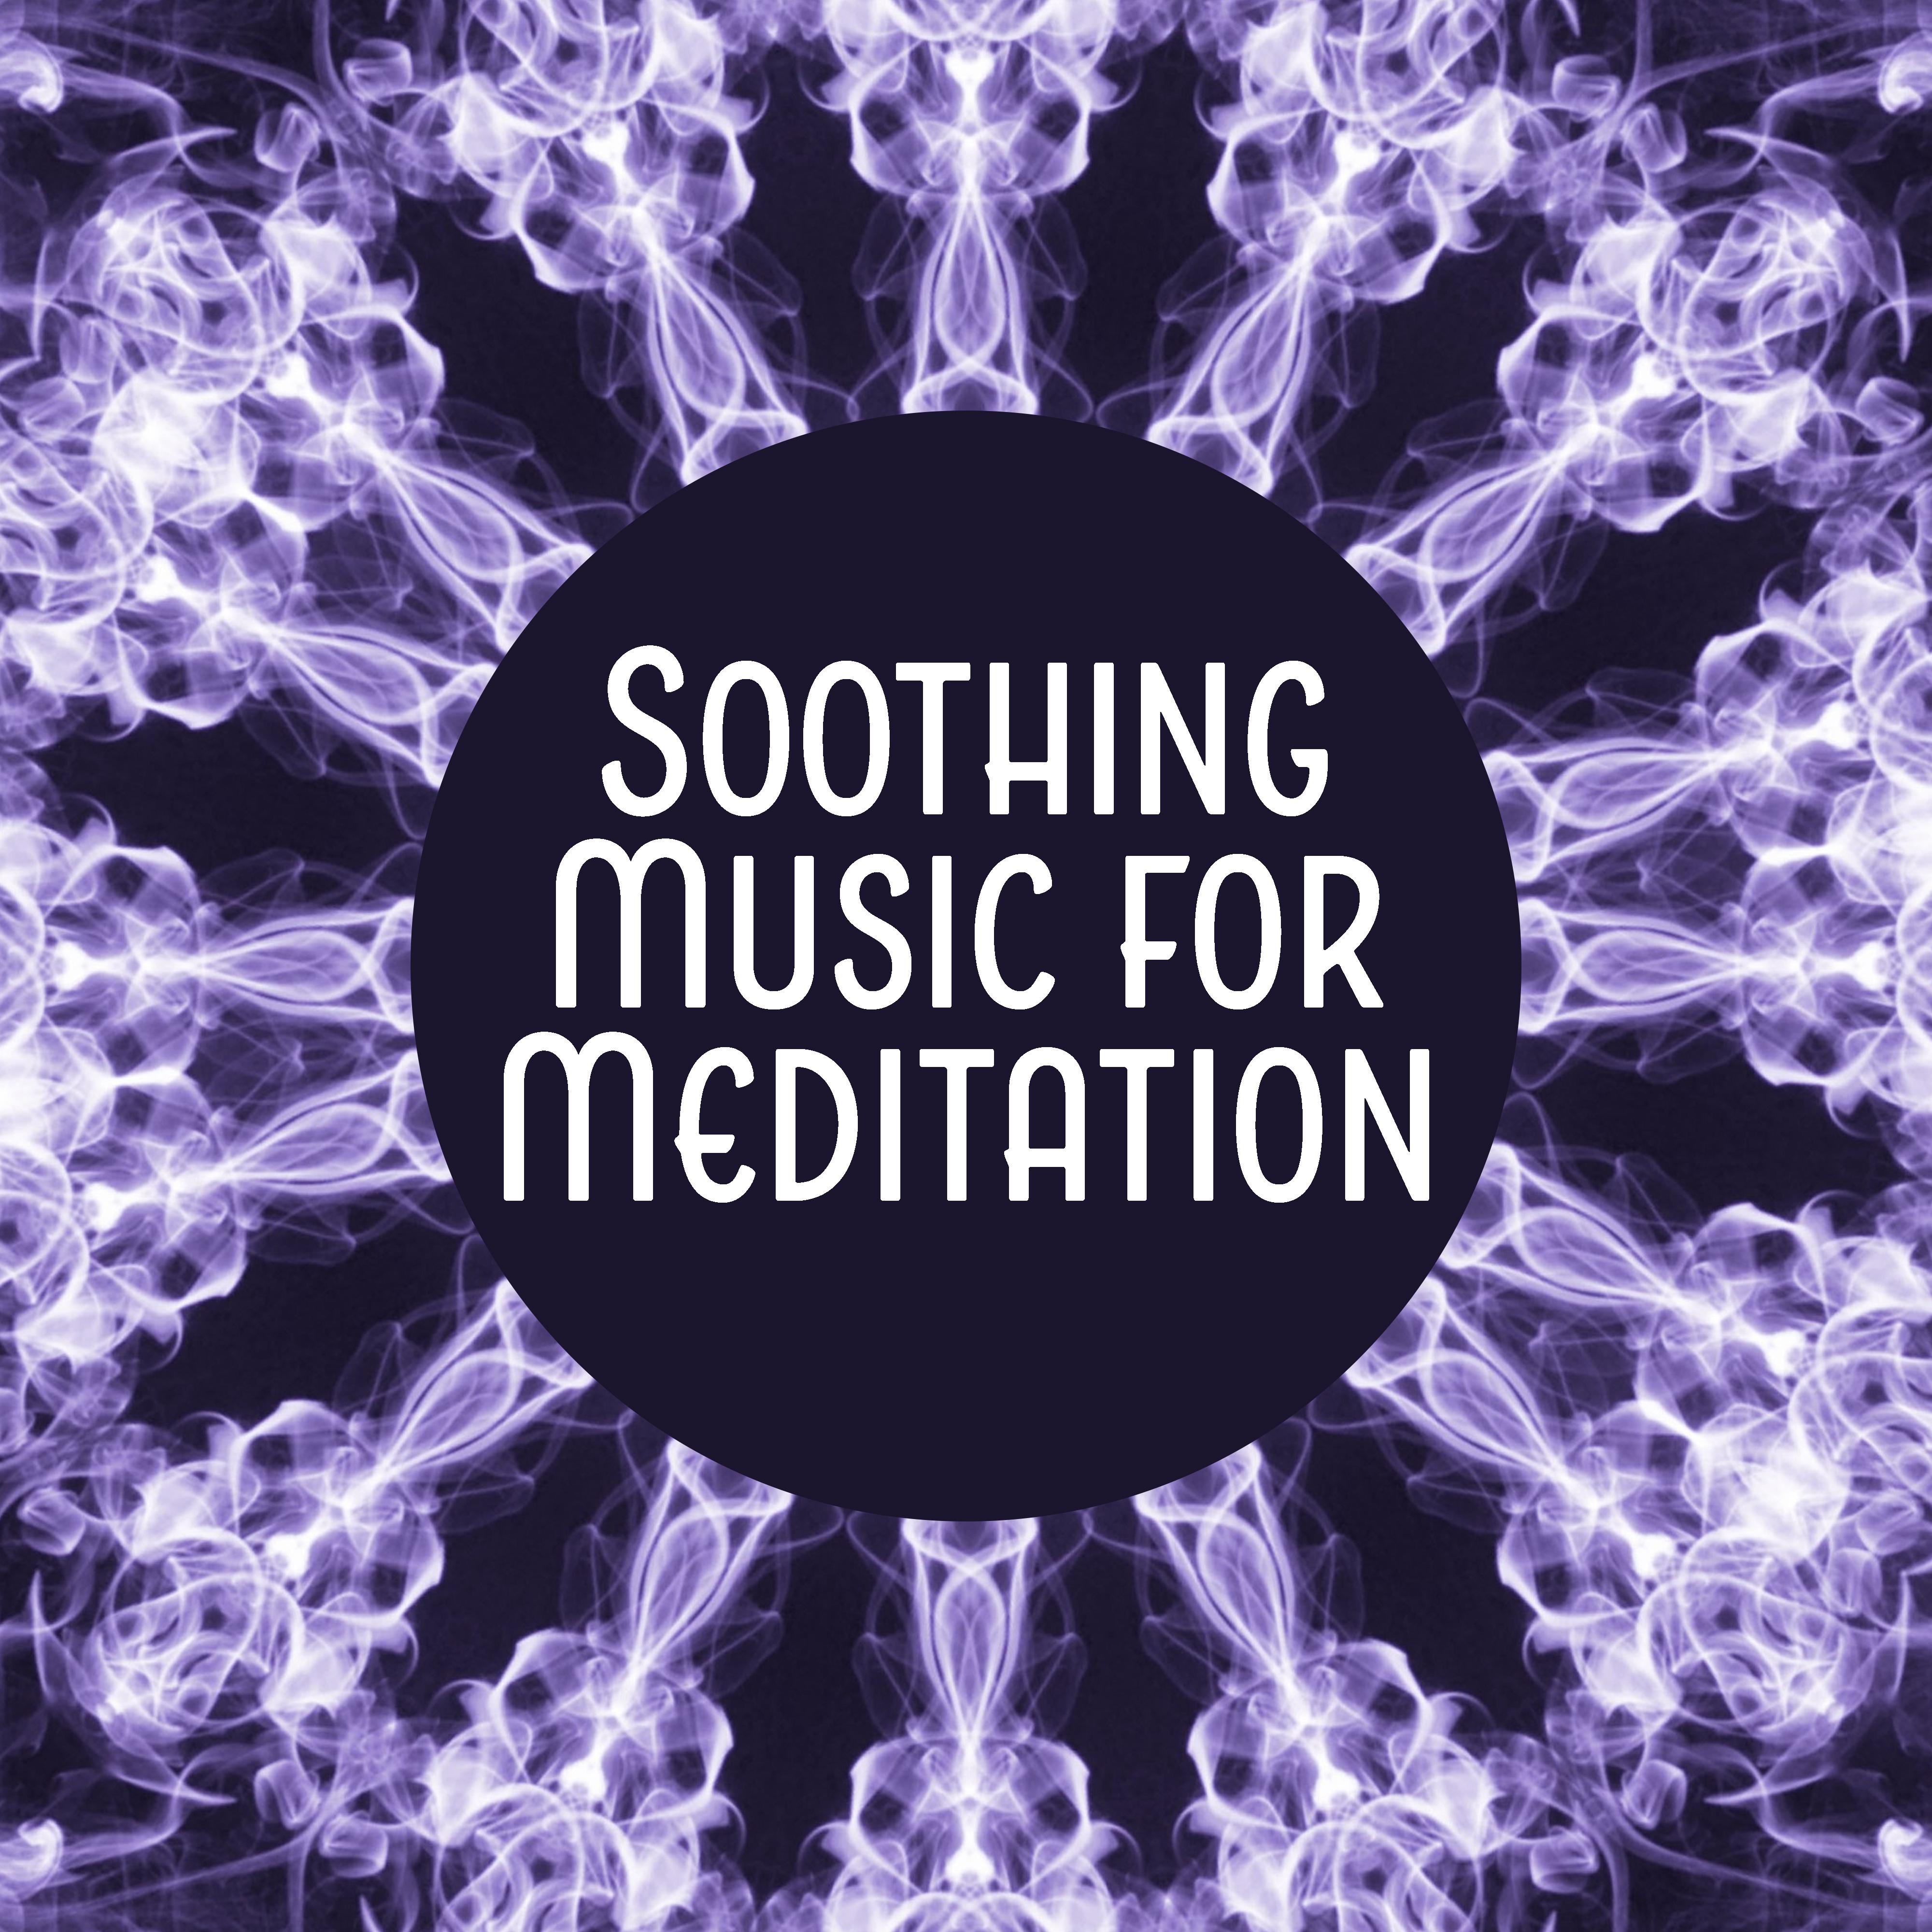 Soothing Music for Meditation  Training Yoga, Inner Zen, Meditate, Pure Relaxation, Peaceful Mind, Chakra Balancing